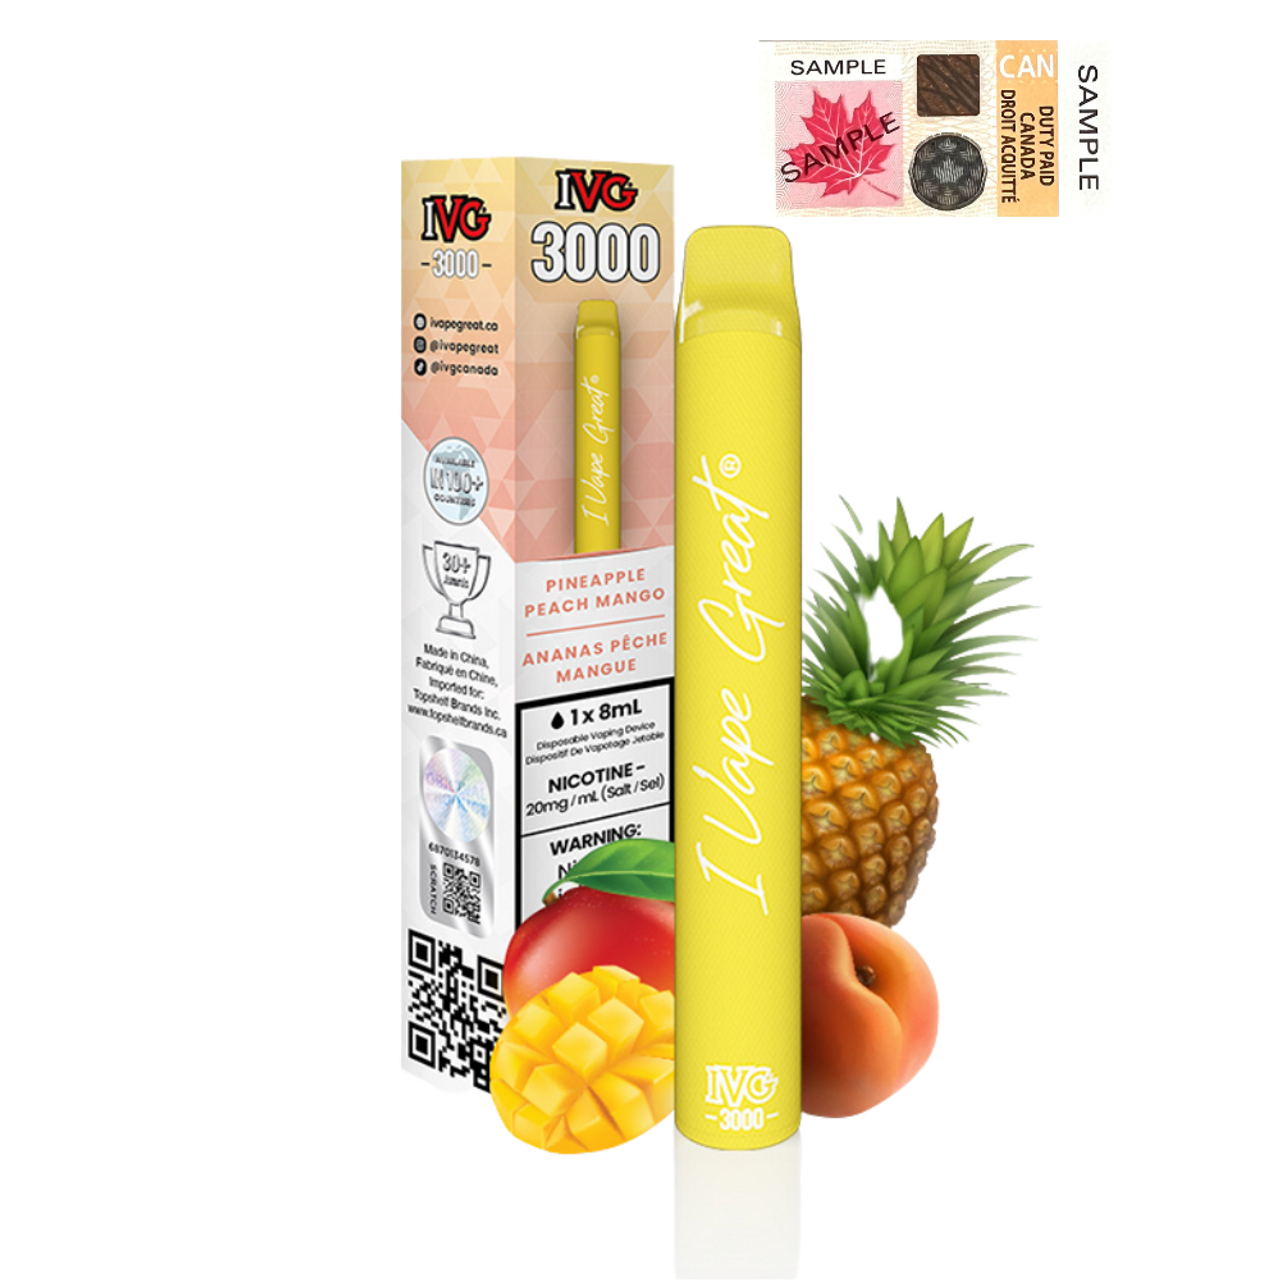 (Stamped) Pineapple Peach Mango IVG 3000 Puffs Disposable Vape Ct 6